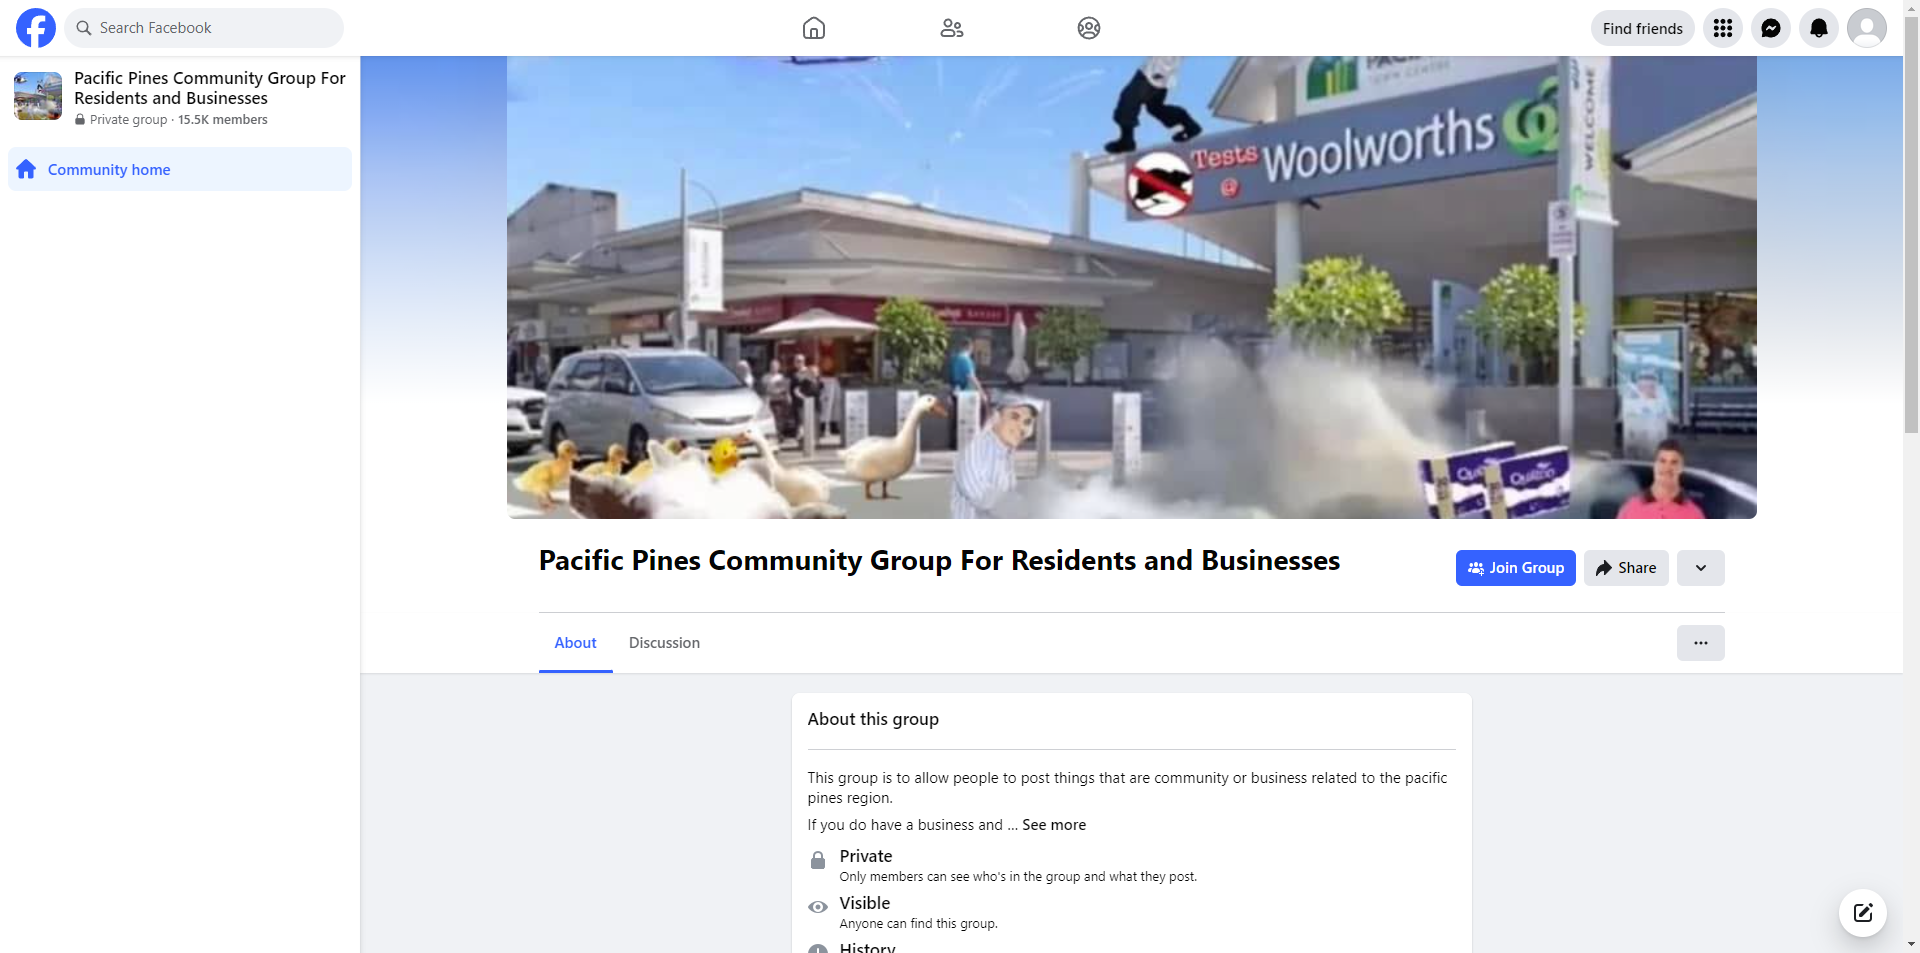 Pacific Pines Community Group for Residents and Businesses